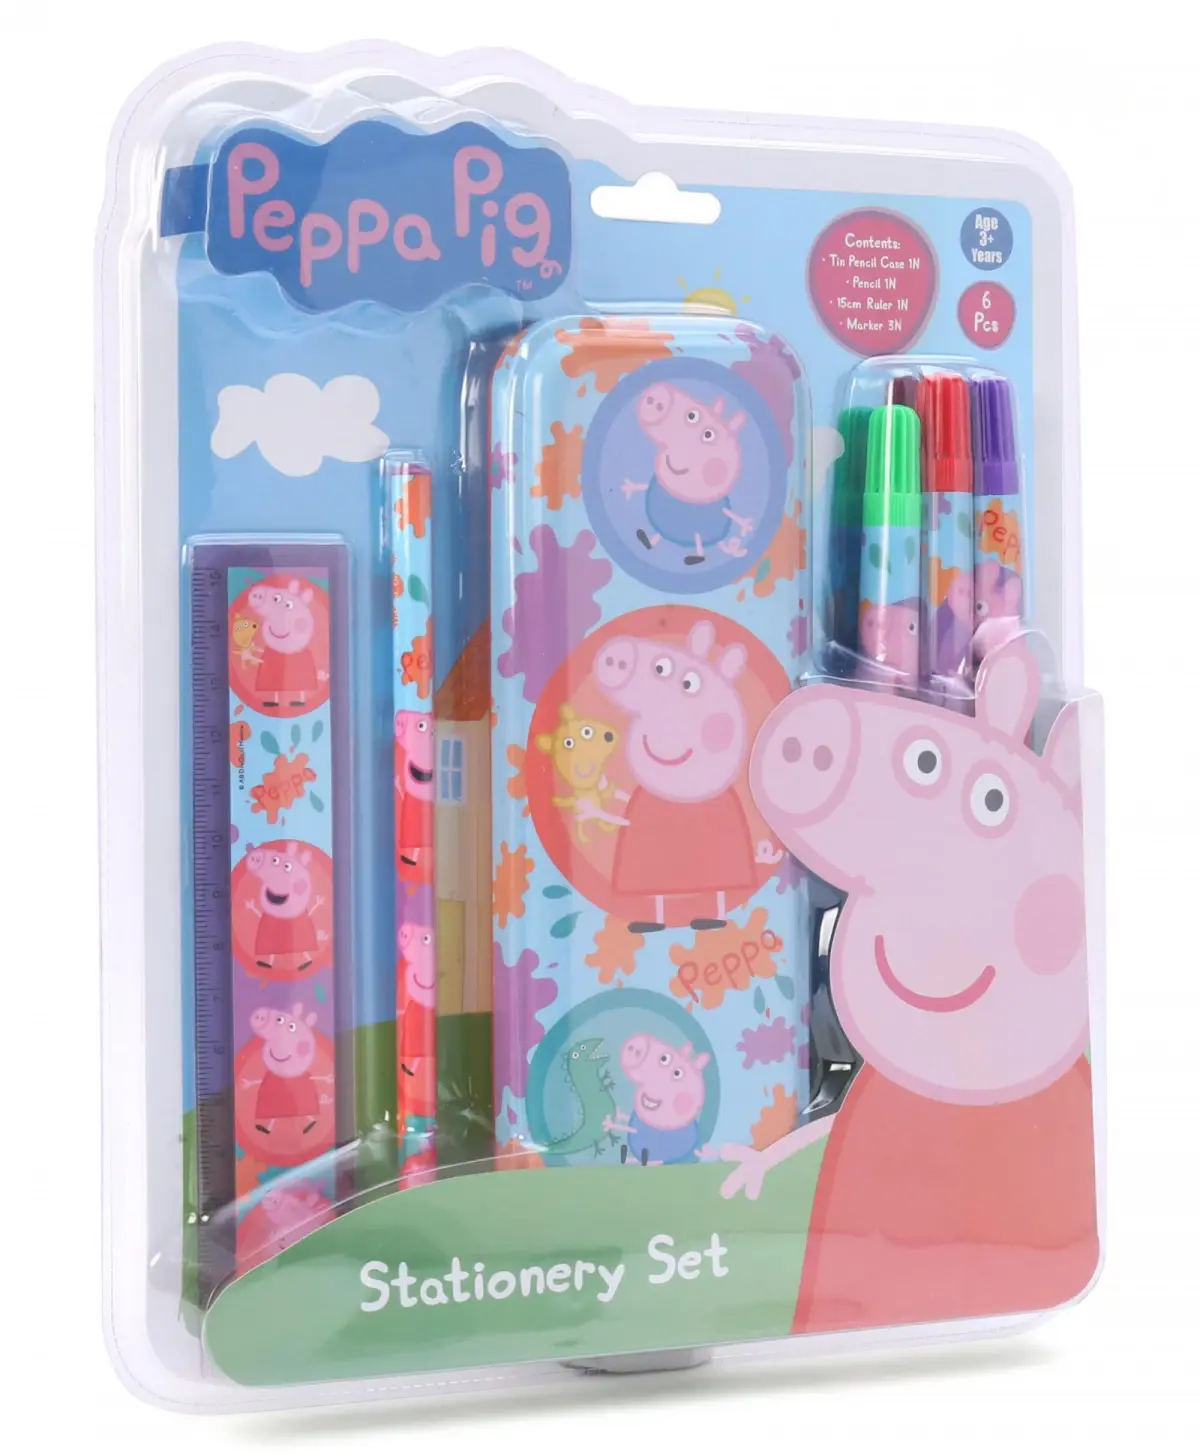 Striders Peppa Pig Stationery Set (6Pcs) With Peppa Pig Theme, 3Y+, Multicolour